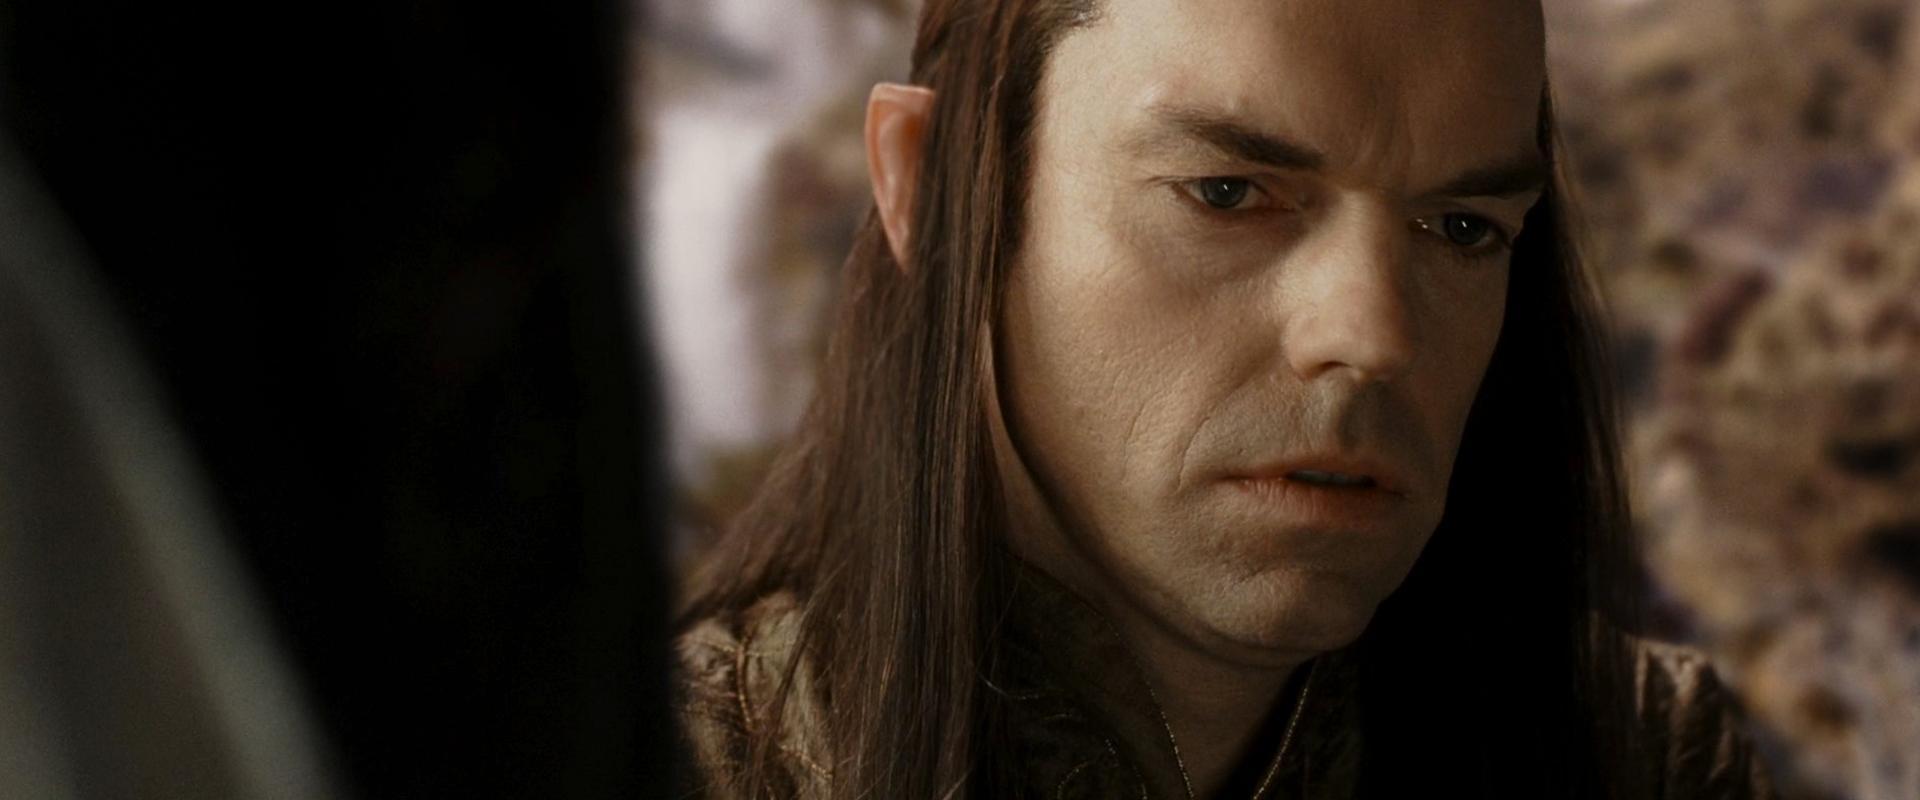 Hugo Weaving on 'The Lord of the Rings' and 'Measure for Measure